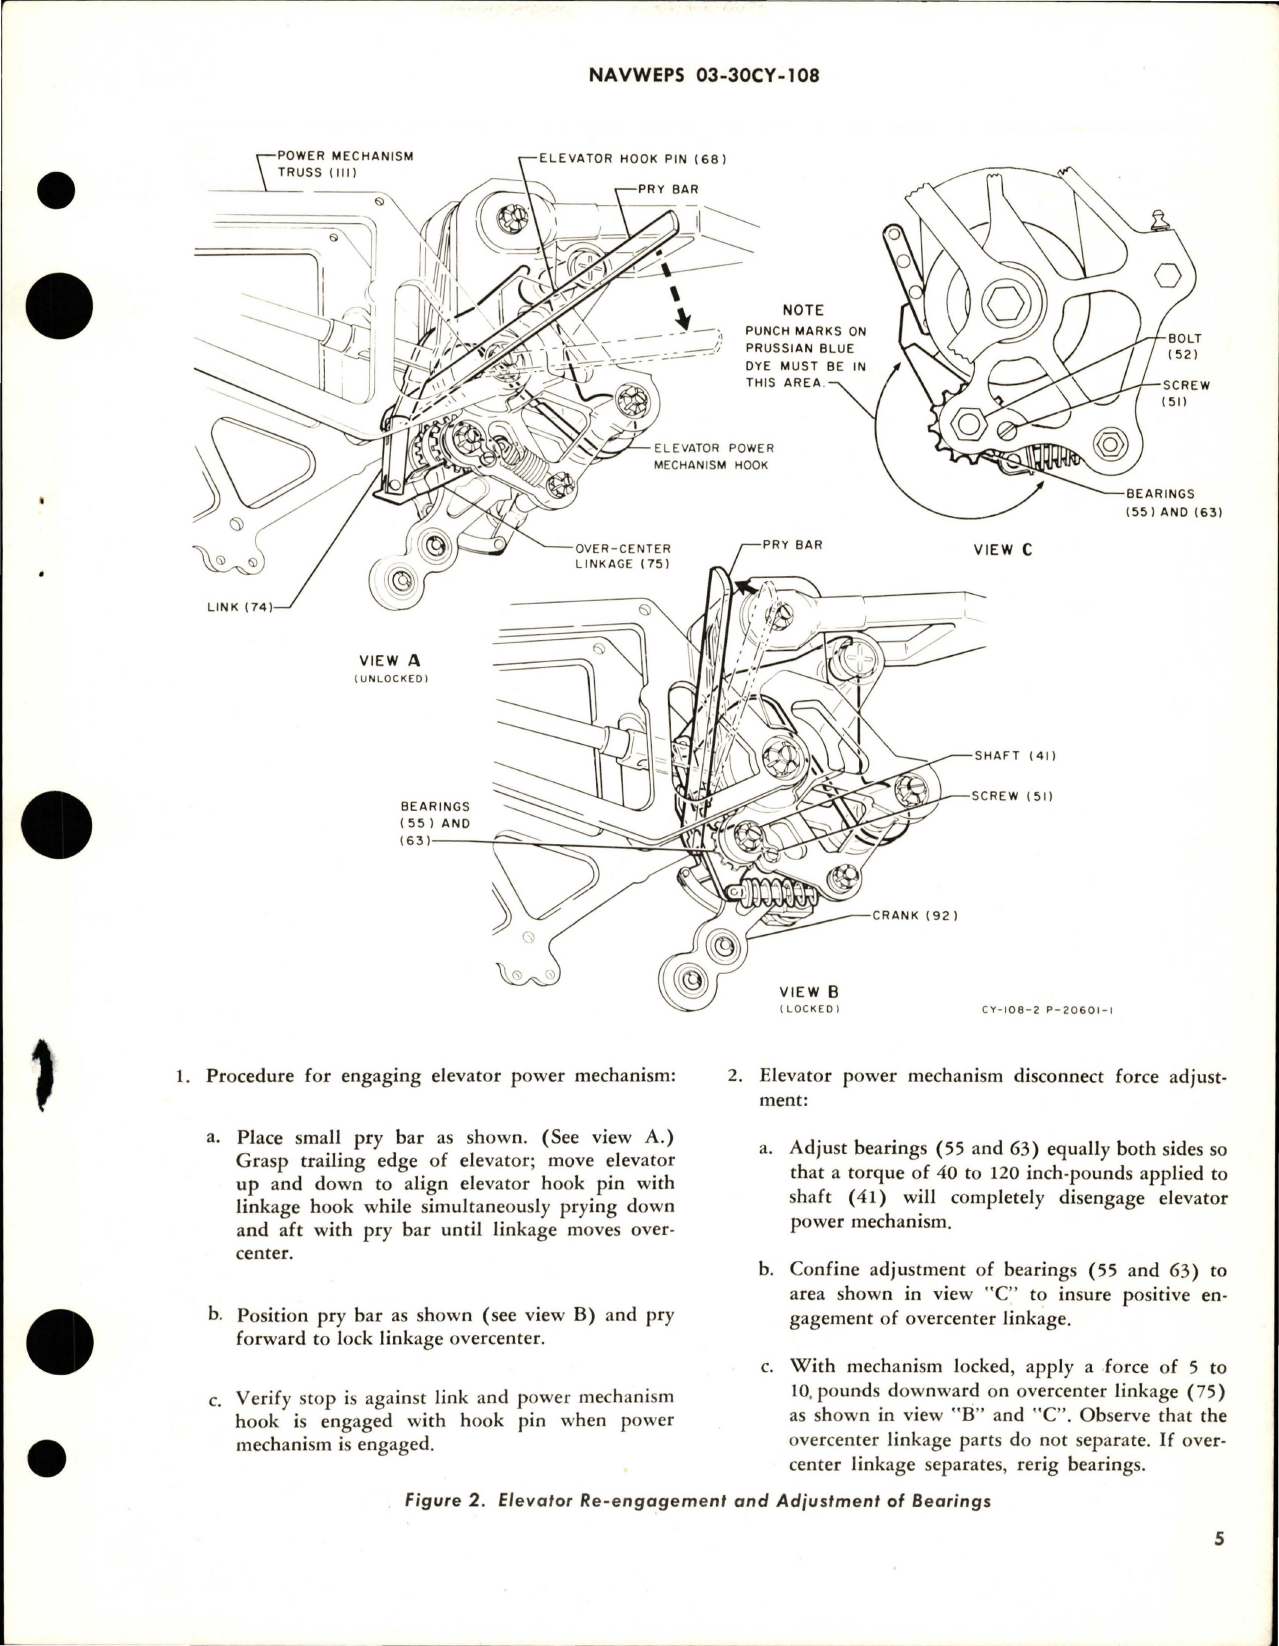 Sample page 5 from AirCorps Library document: Overhaul Instructions with Parts for Mechanism Assembly Elevator Power Boost - 5445823-3